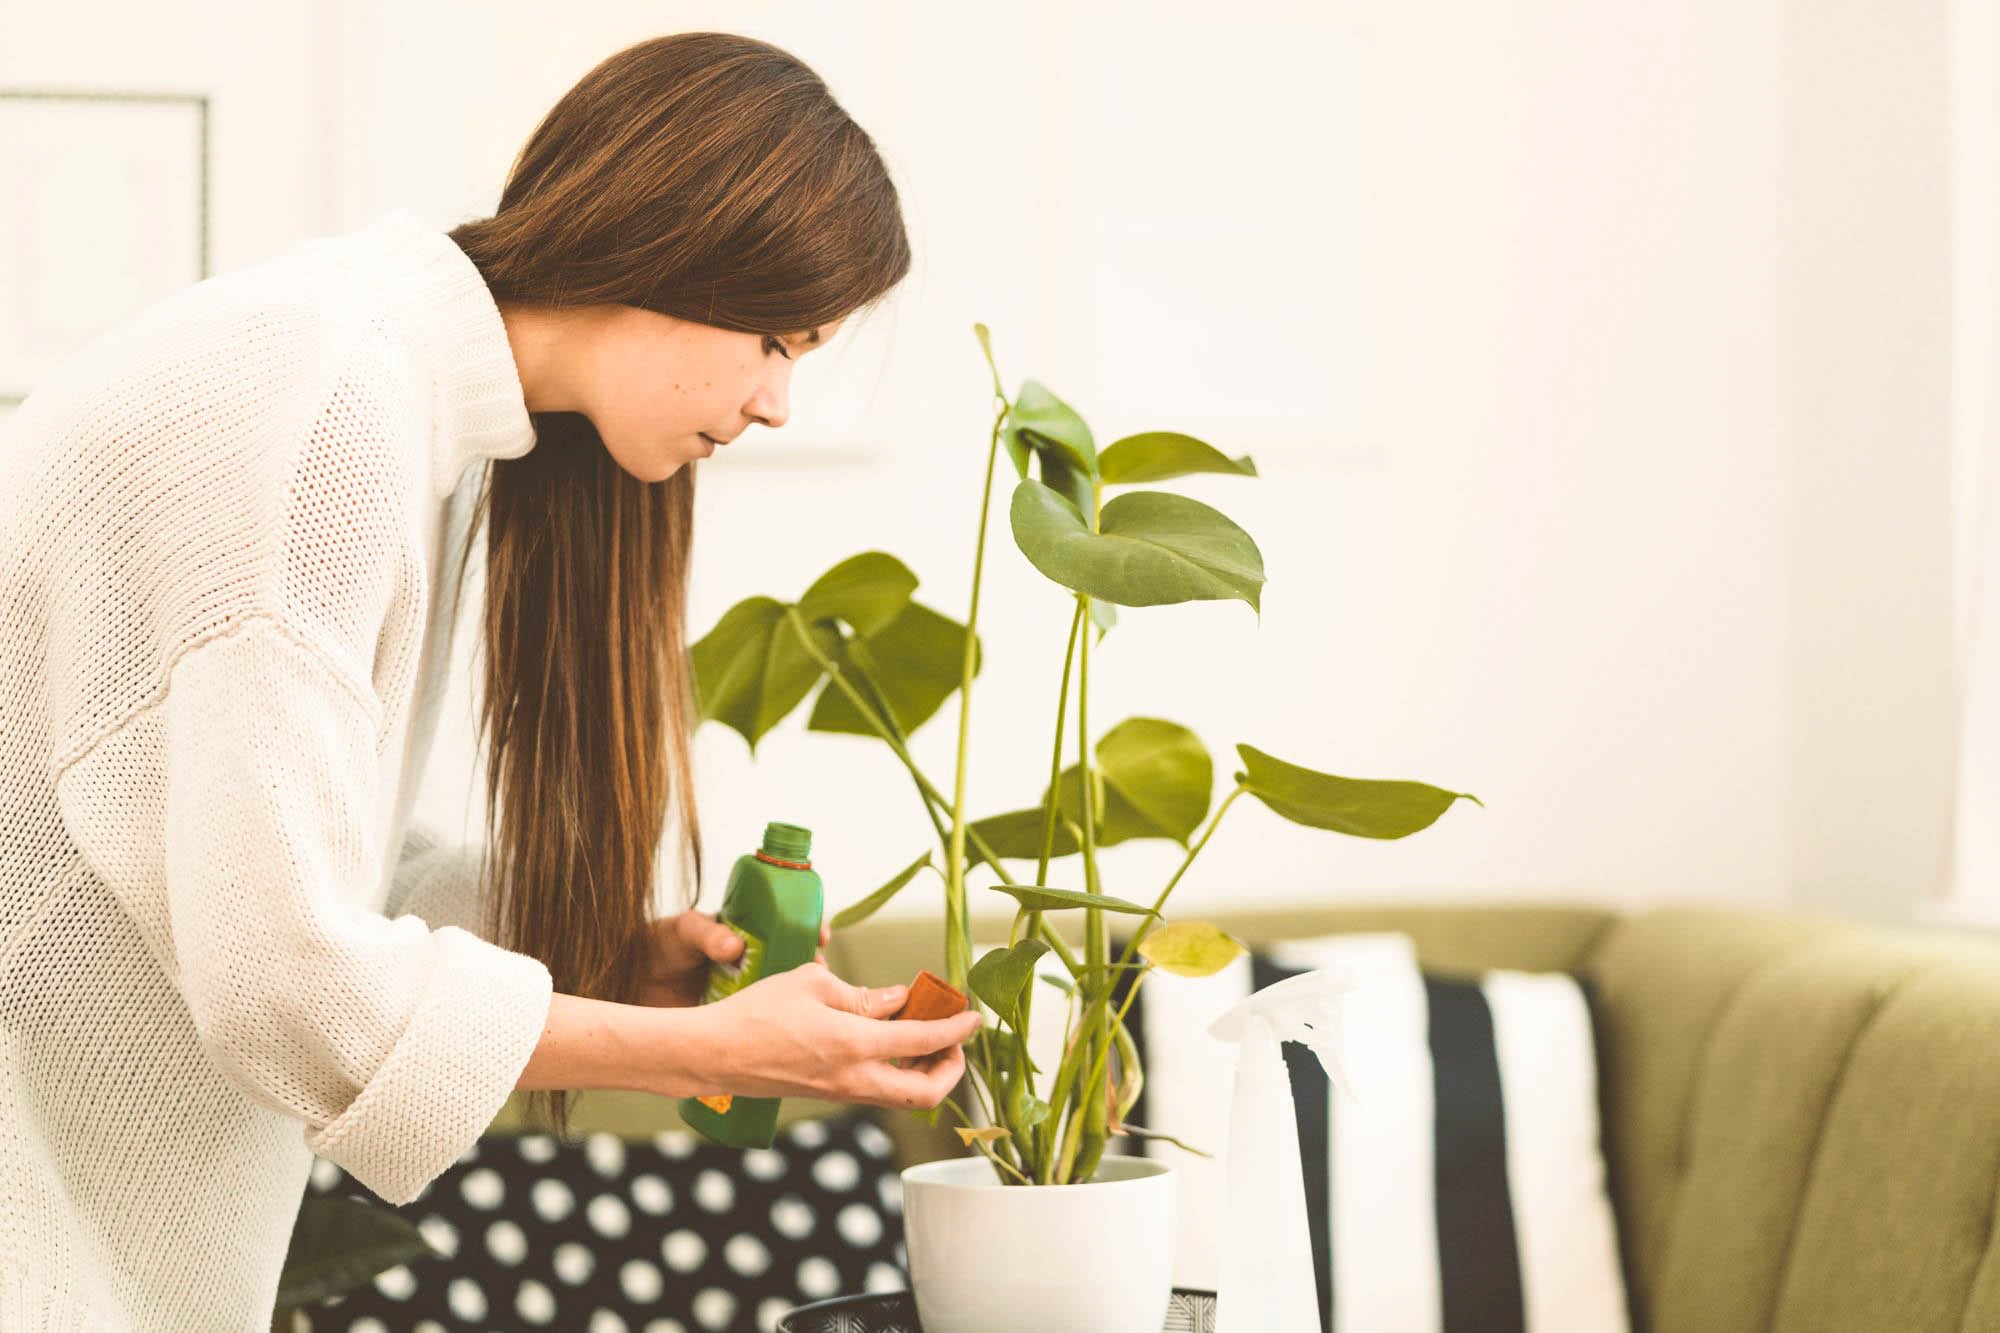 Woman with long hair fertilizing her monstera deliciosa plant during winter.